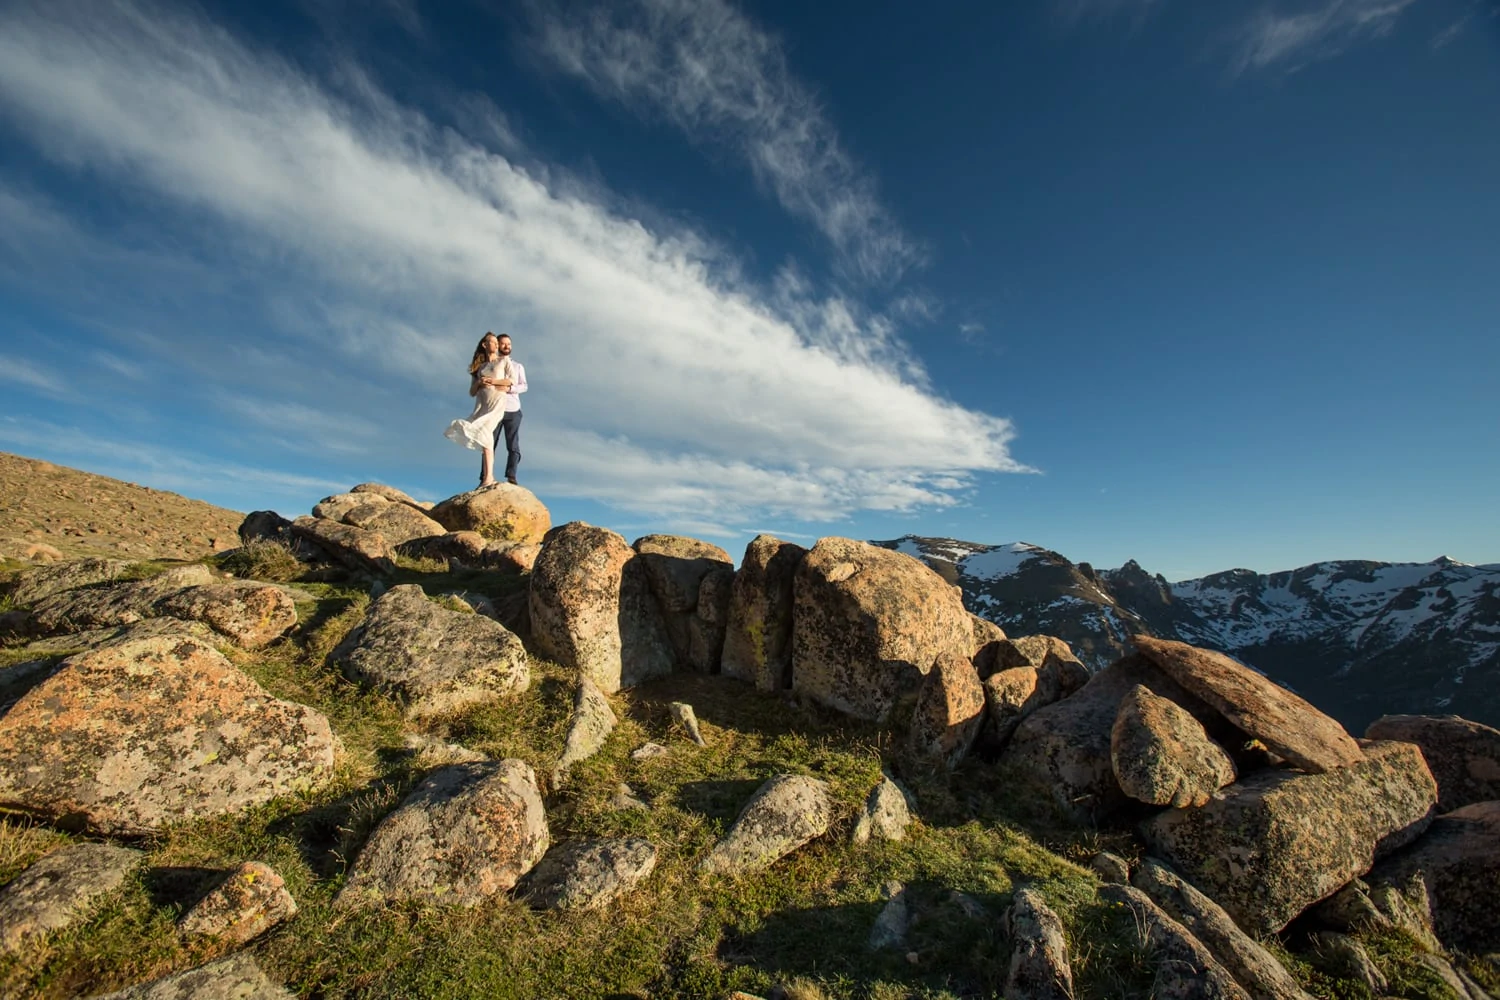 Wind blows around the engagement photographer as they shoot on trail ridge road in rocky mountain national park.